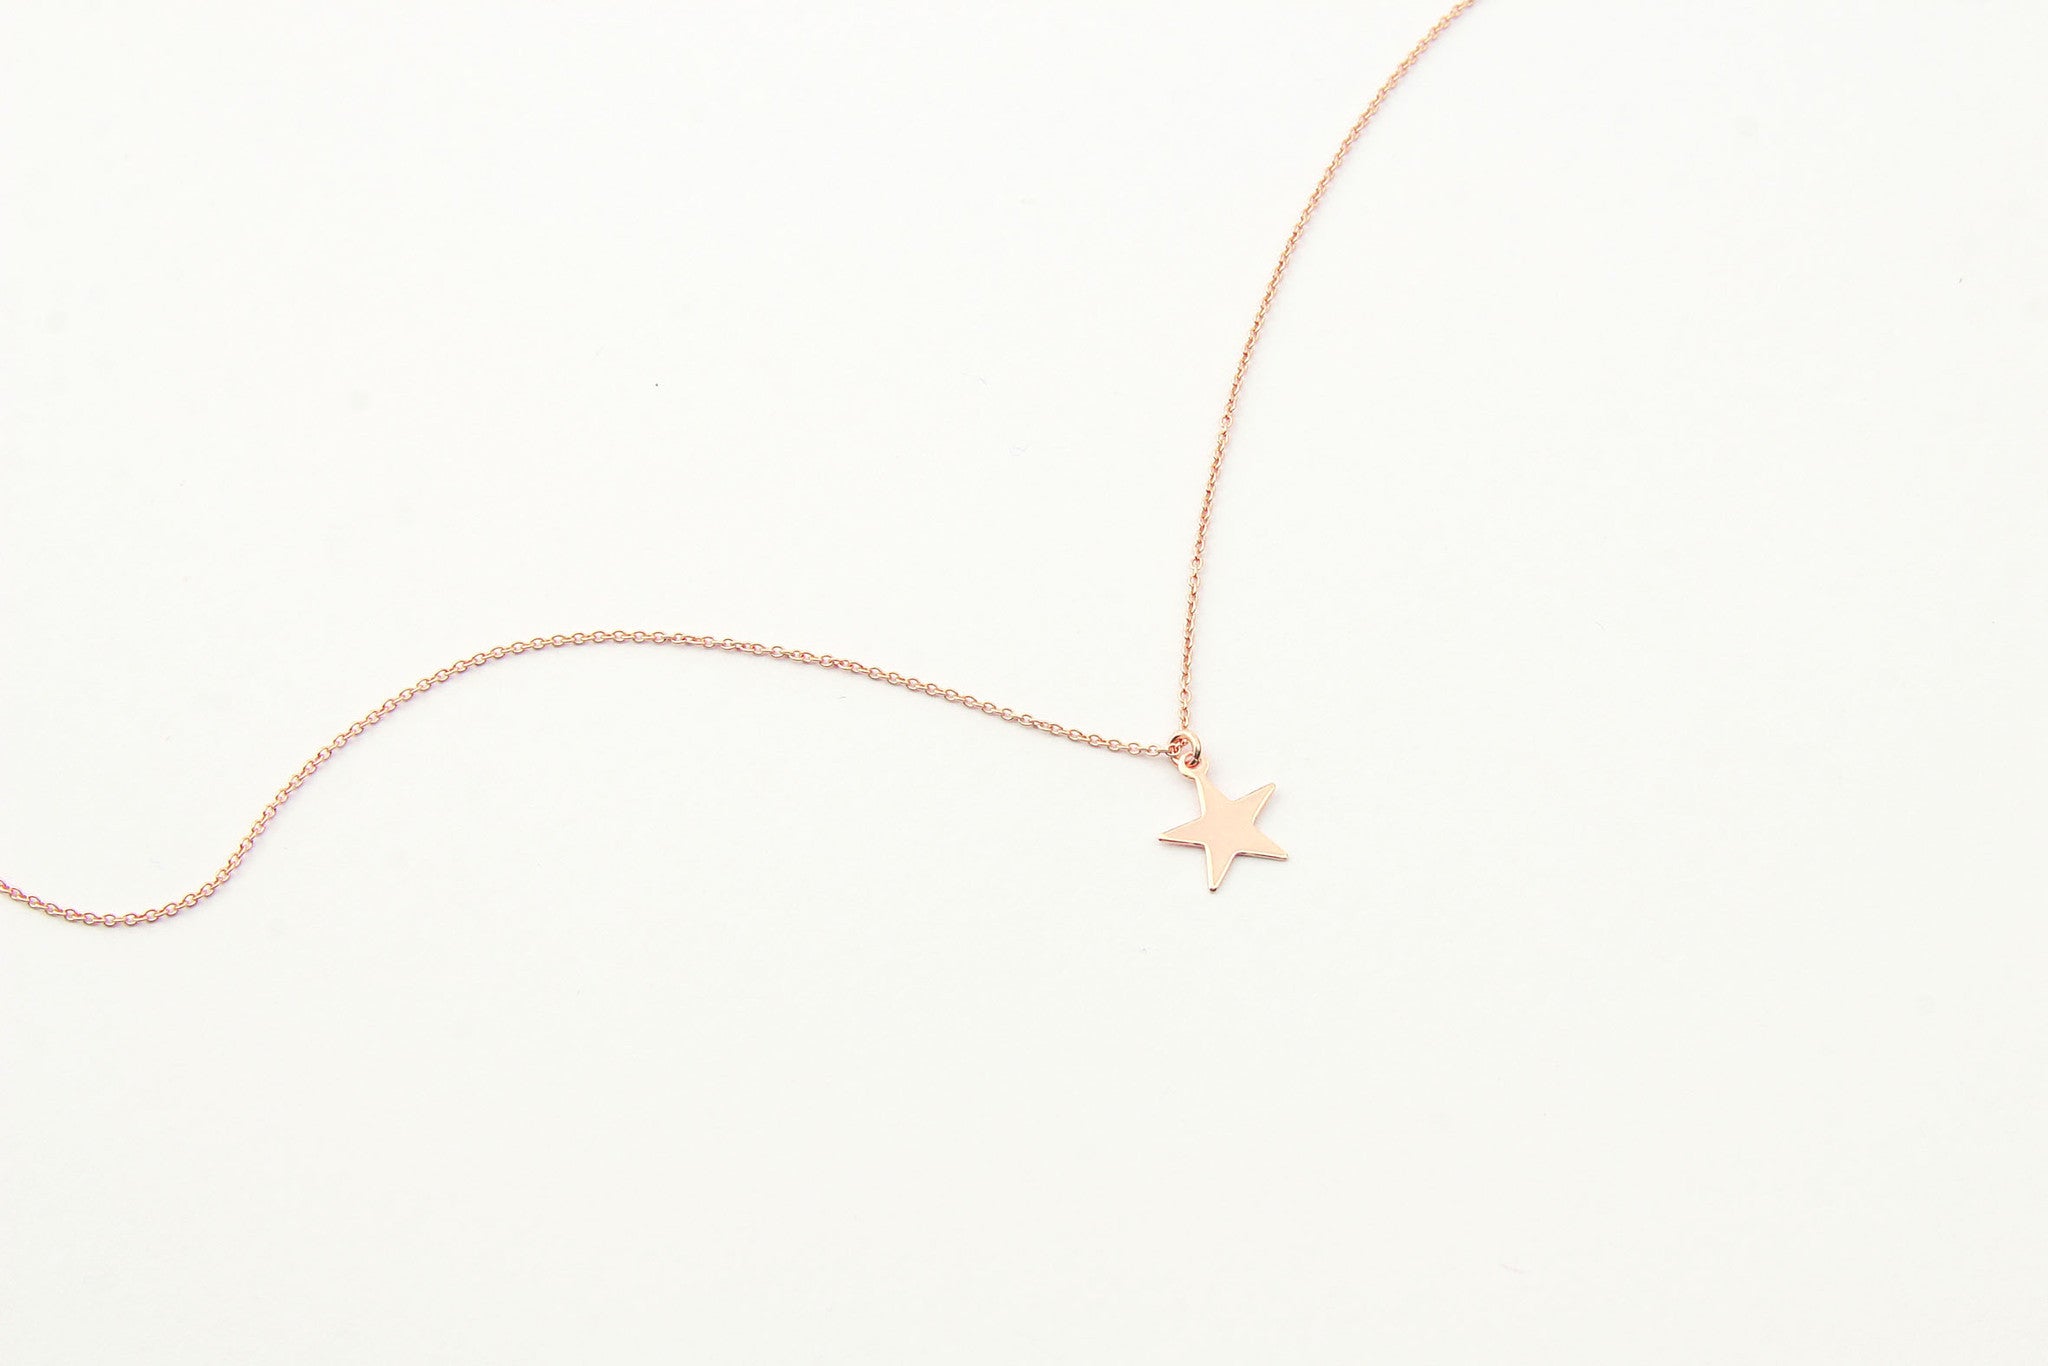 jewelberry necklace kette plain star anchor chain rose gold plated sterling silver fine jewelry handmade with love fairtrade